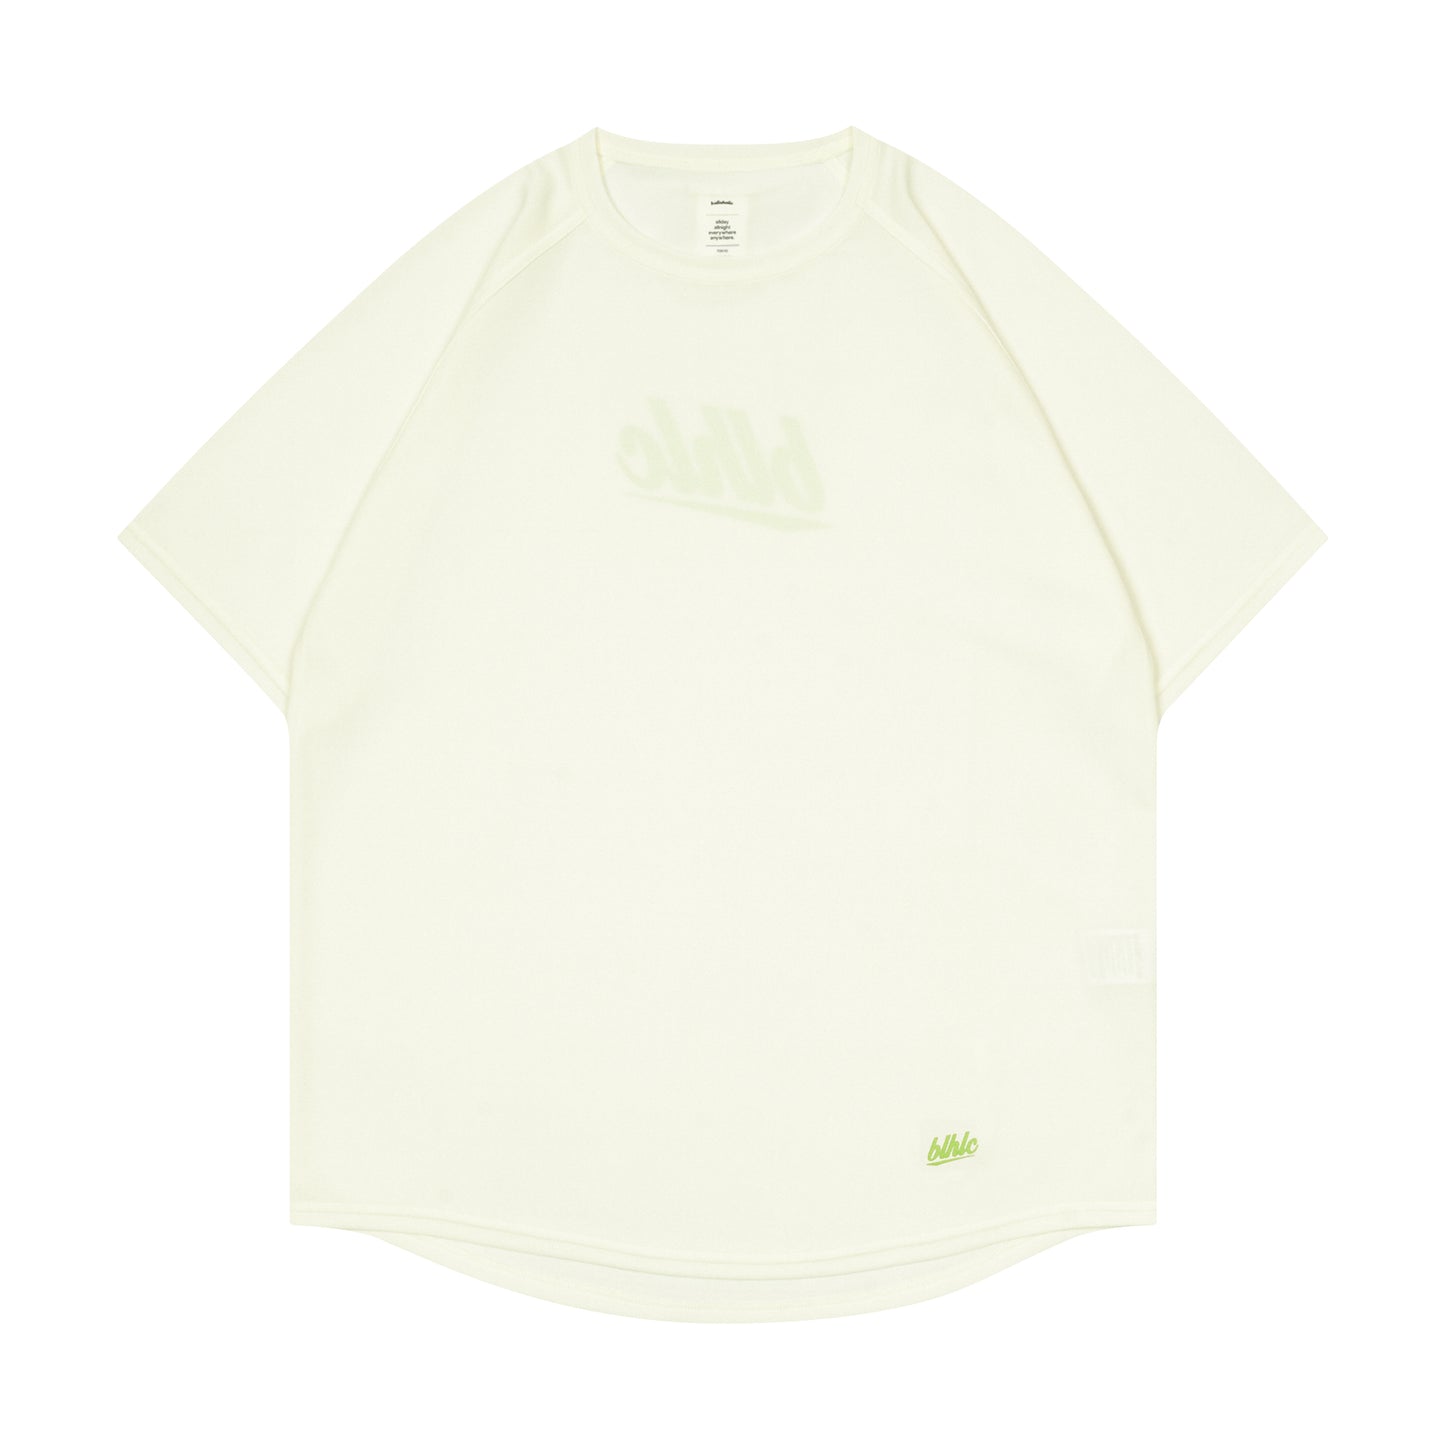 blhlc Back Print Cool Tee (off white/lime green)